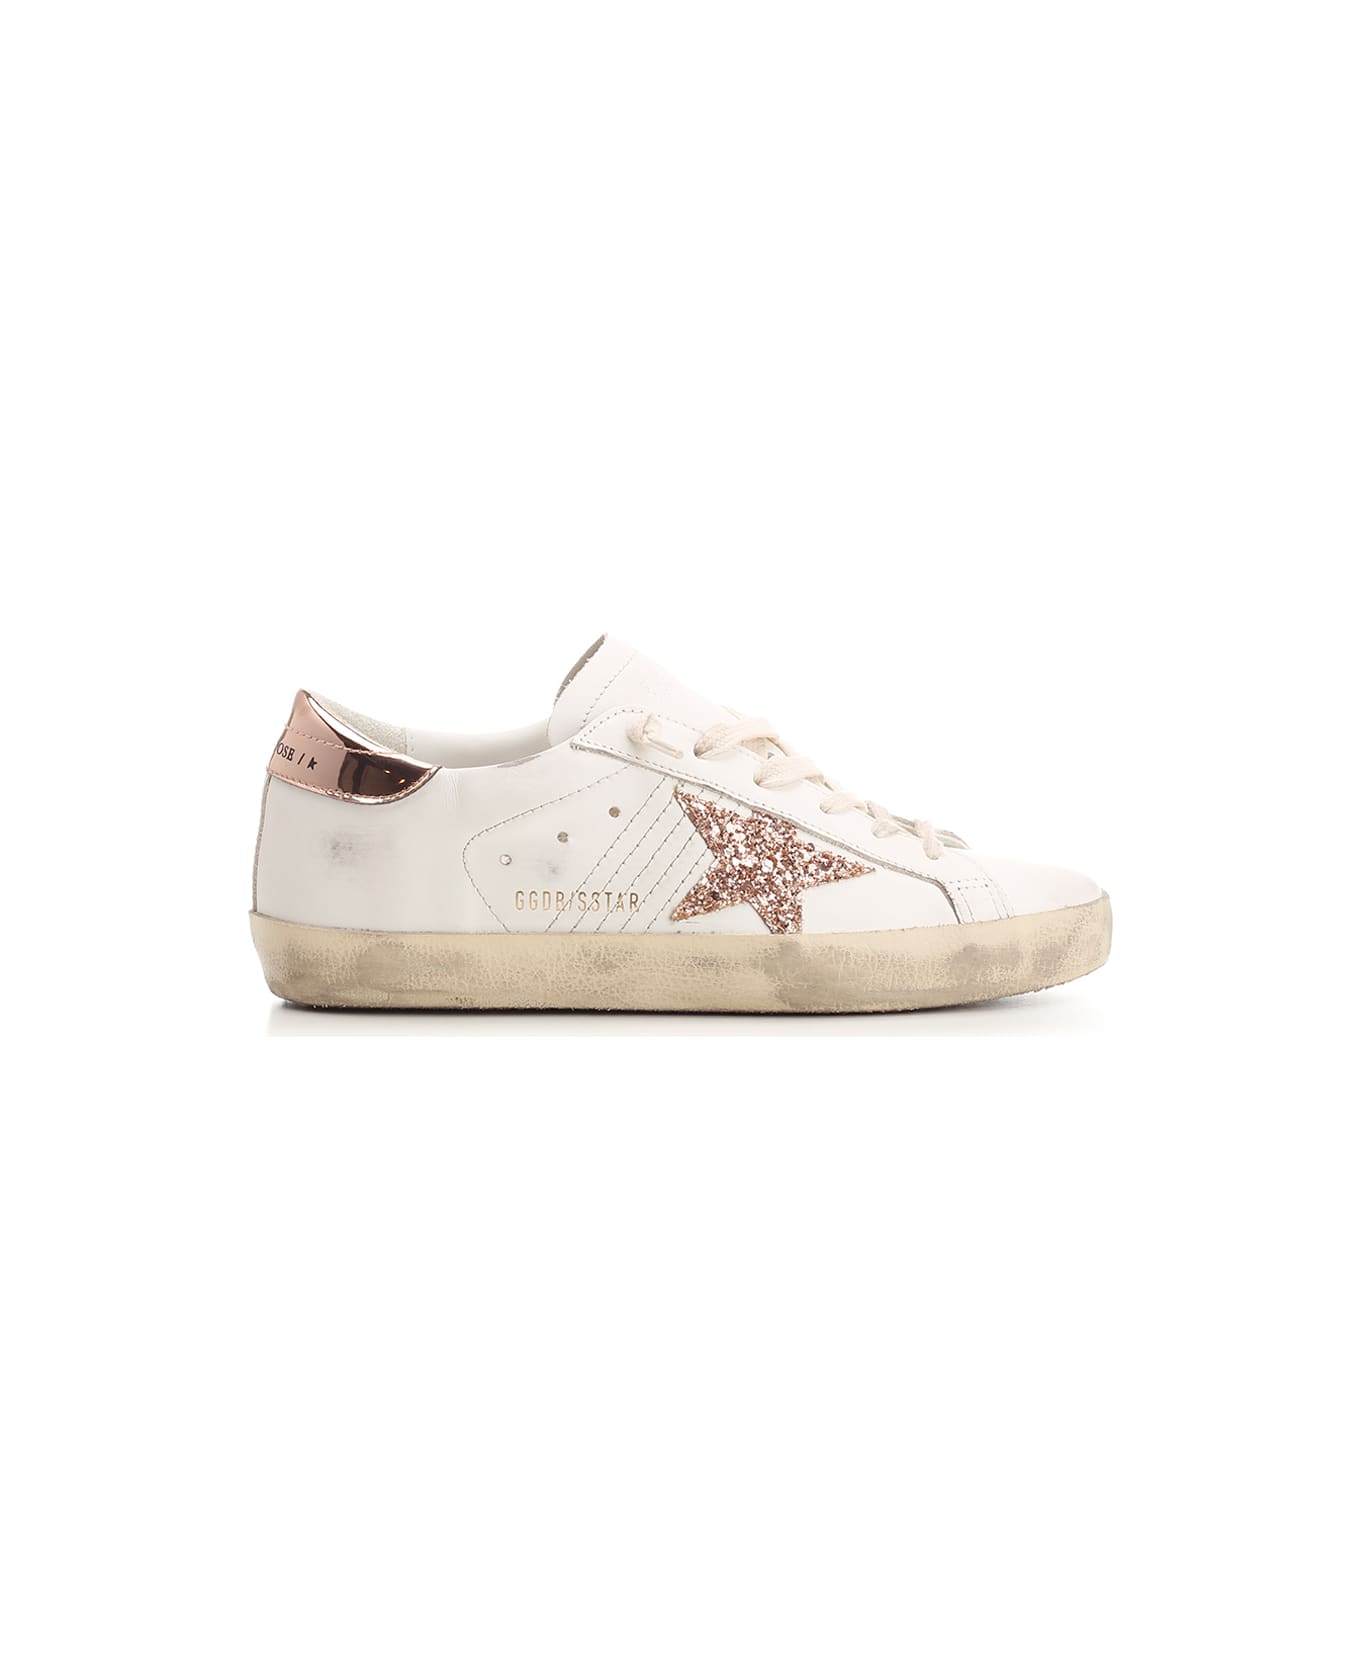 Golden Goose Superstar Classic Sneakers - WHITE/PEACH PINK/ANTIQUE ROSE スニーカー